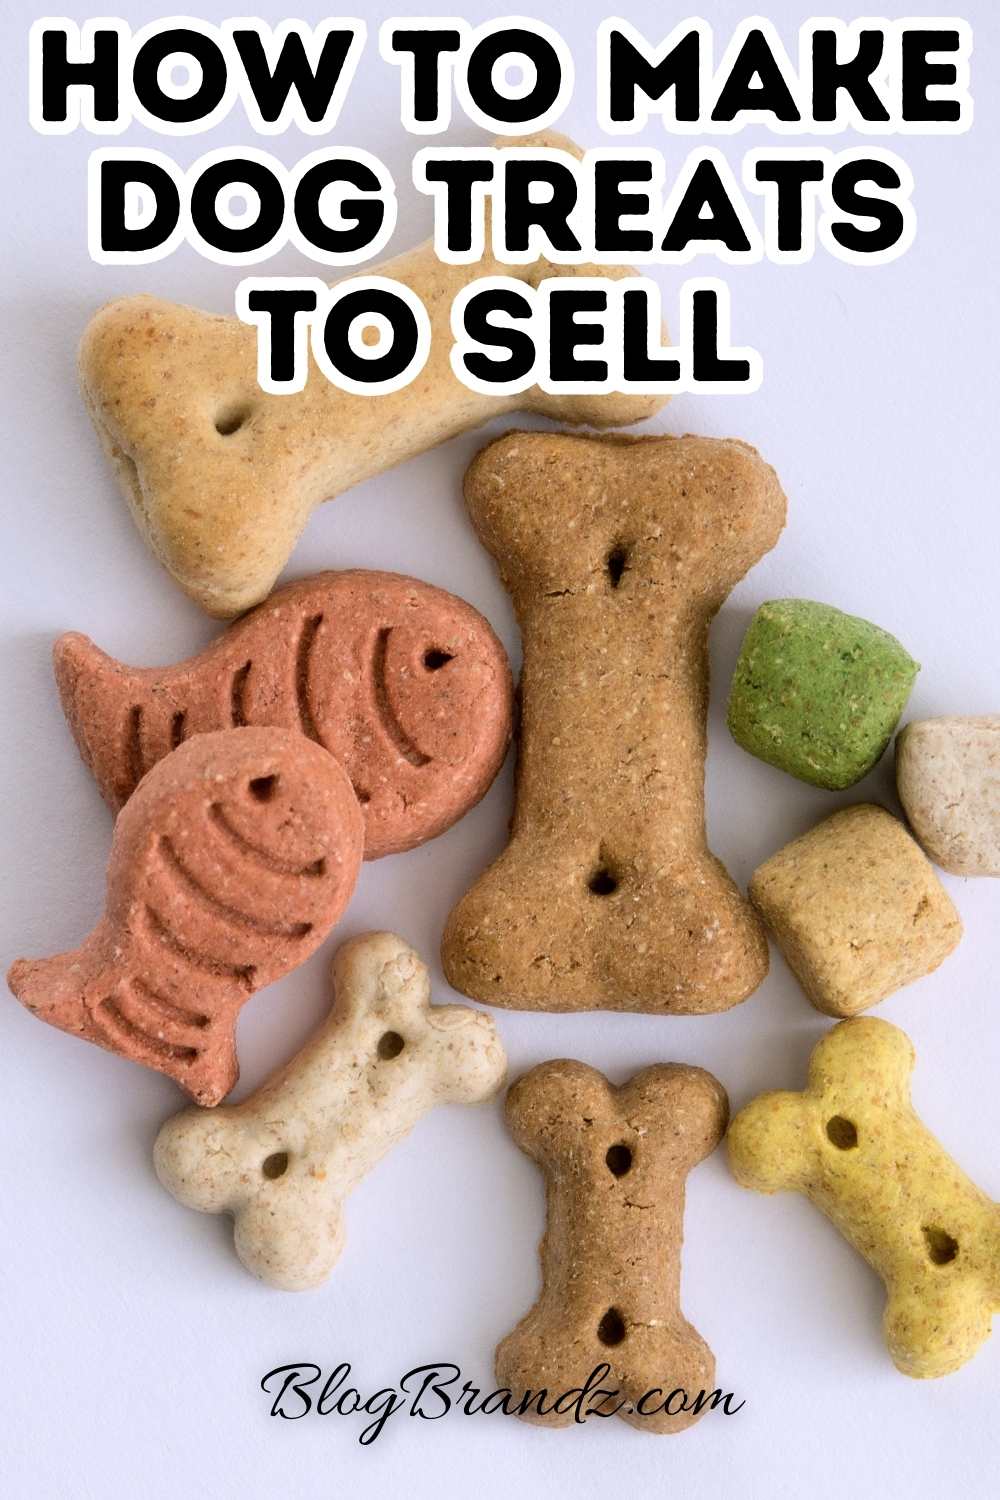 How To Make Dog Treats To Sell